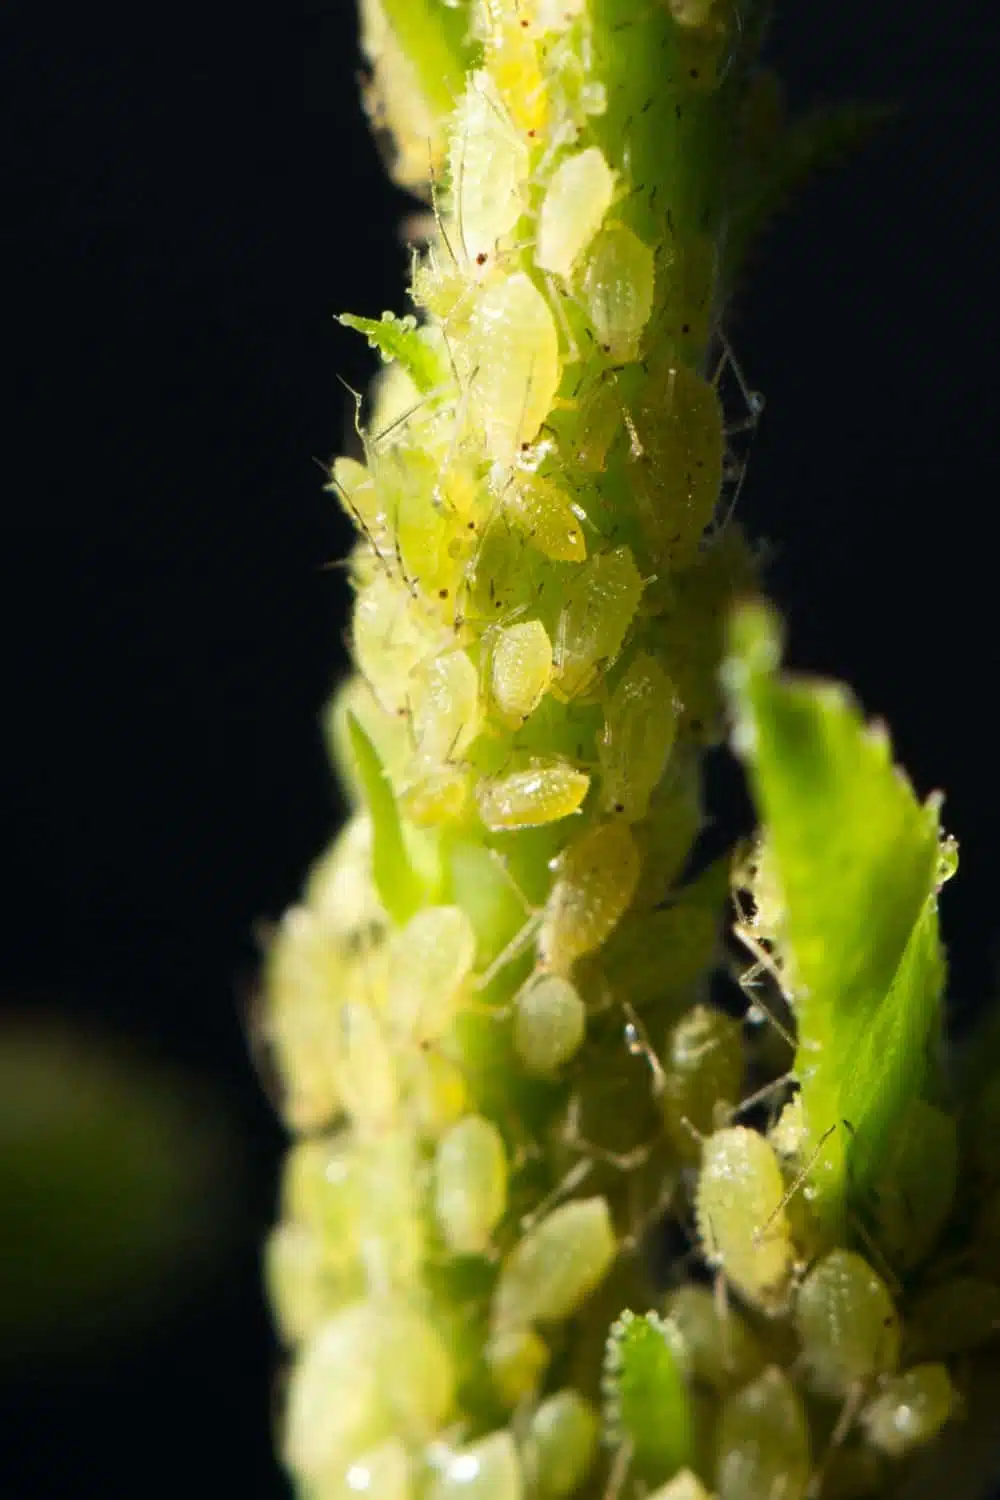 aphids on a plant stem